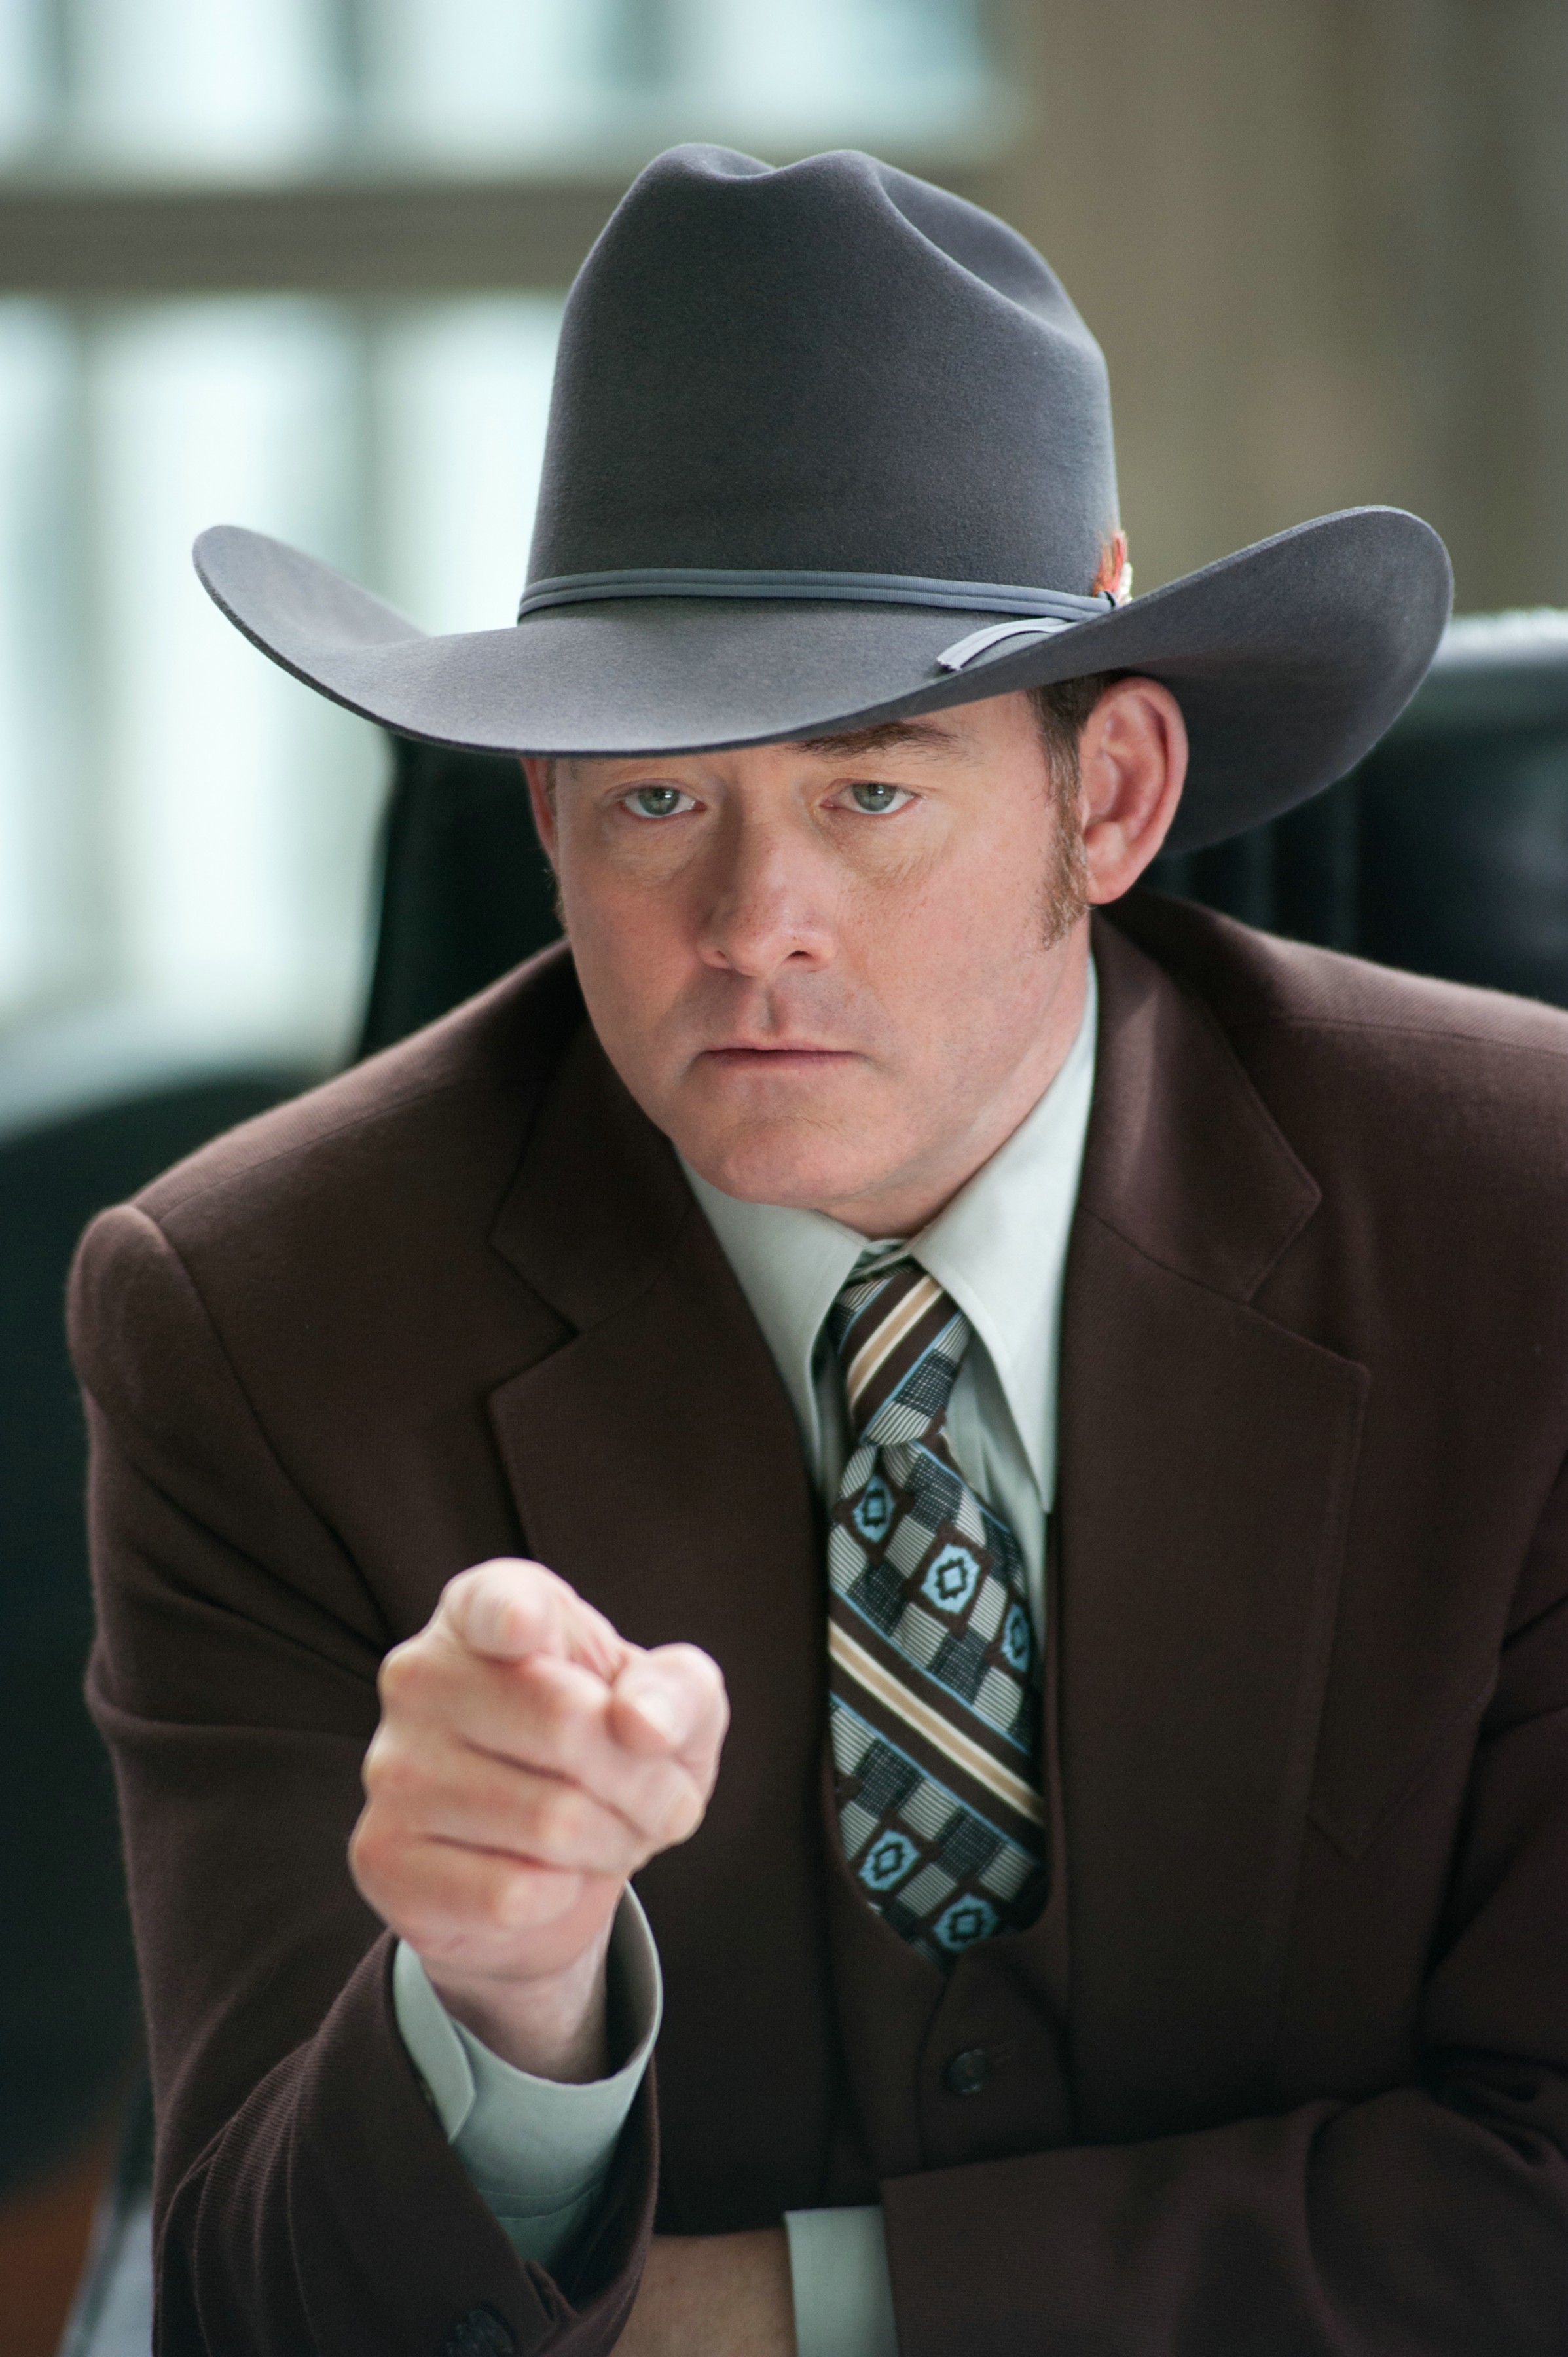 Still of David Koechner in Anchorman 2: The Legend Continues (2013)